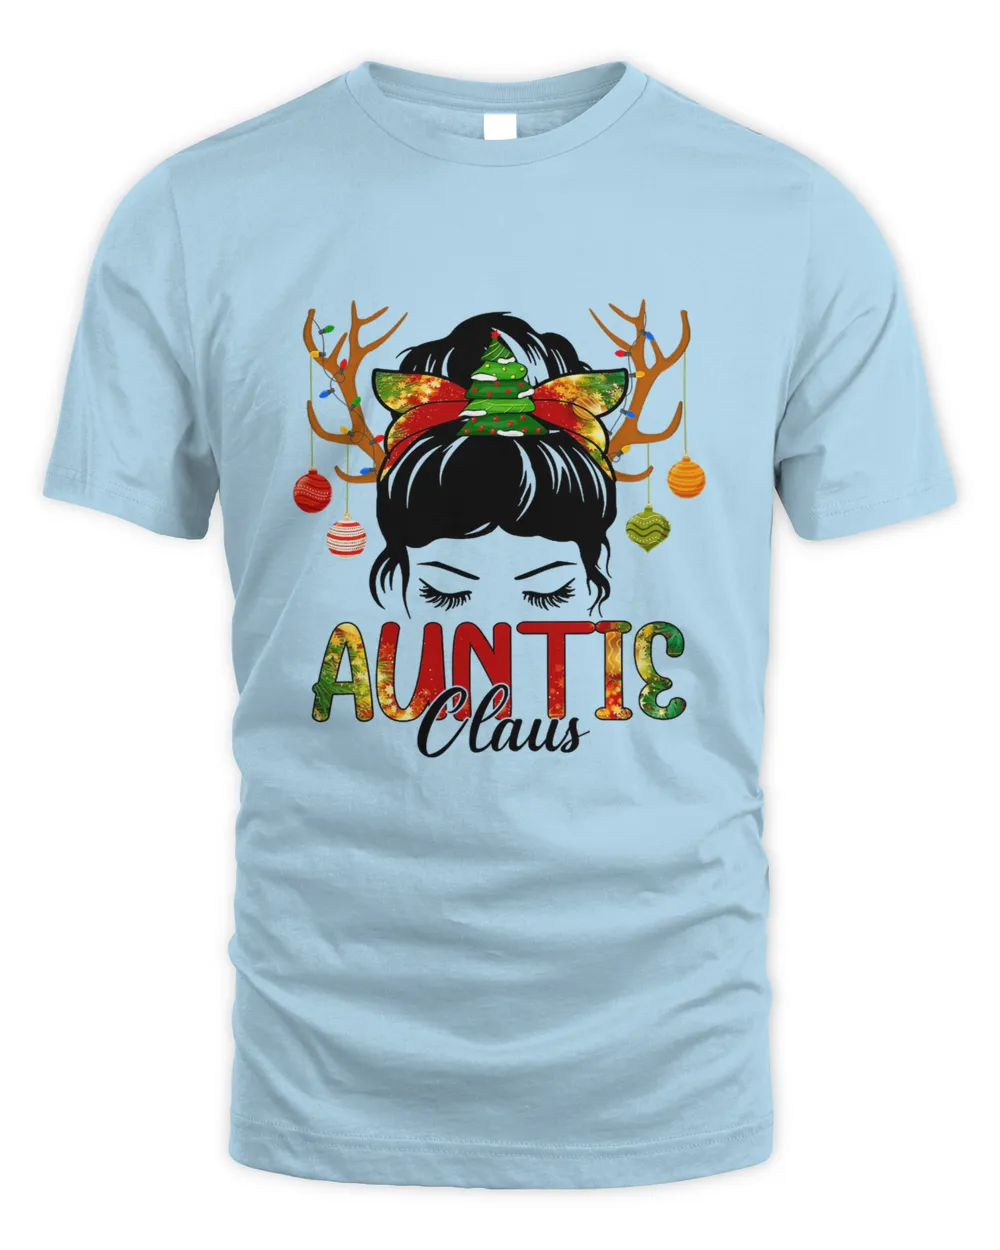 Auntie Claus Messy Bun Wink Eyes Christmas Decorations T-Shirt